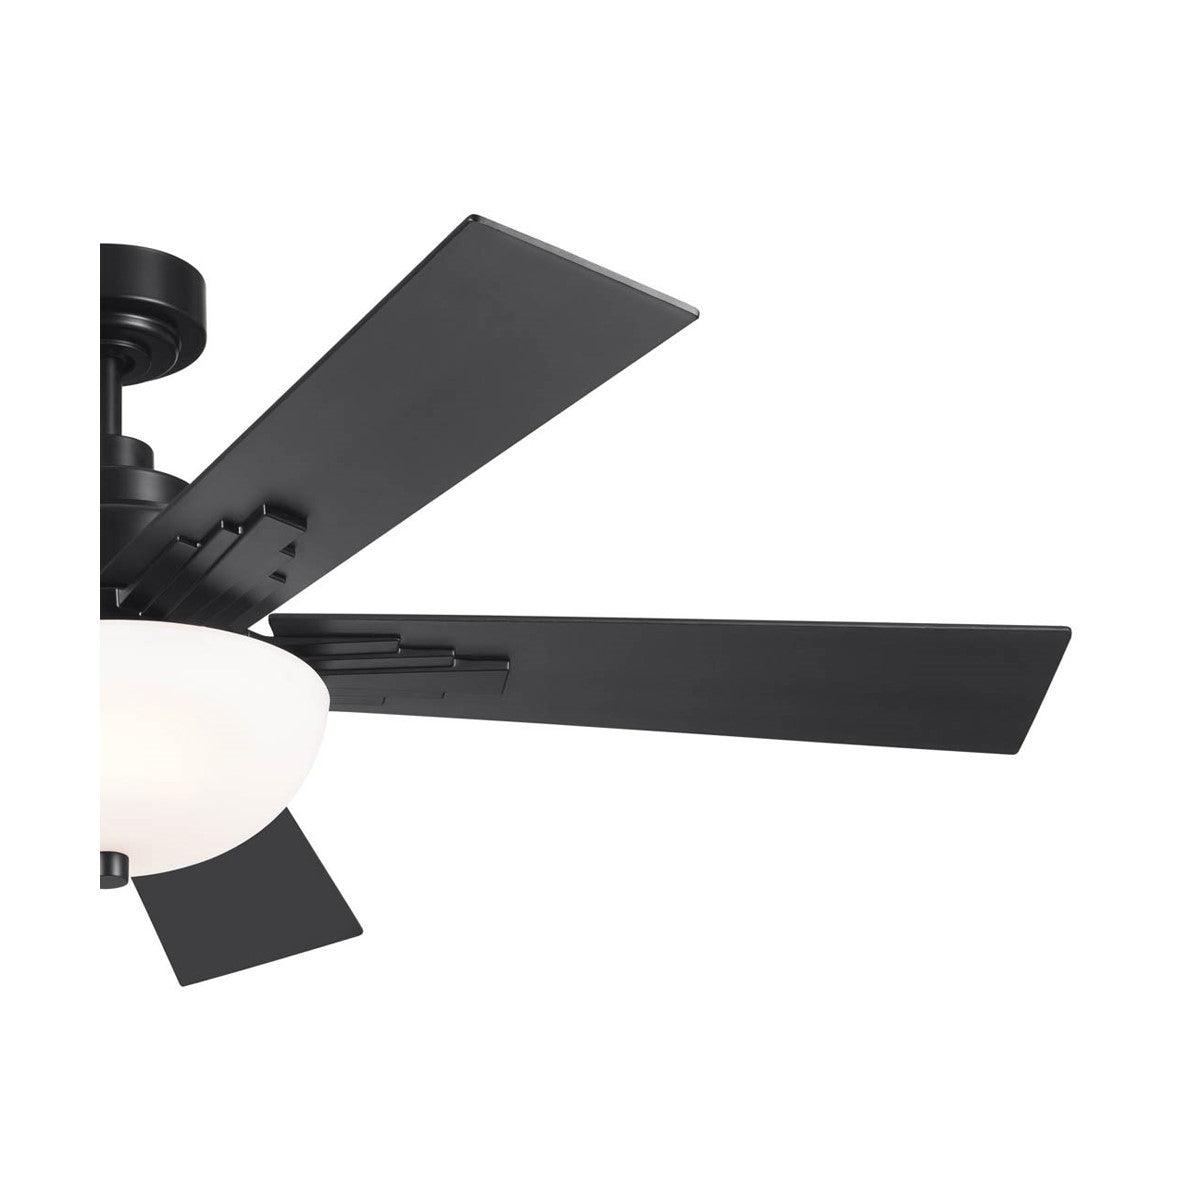 Vinea 52 Inch Modern Ceiling Fan With Light And Remote